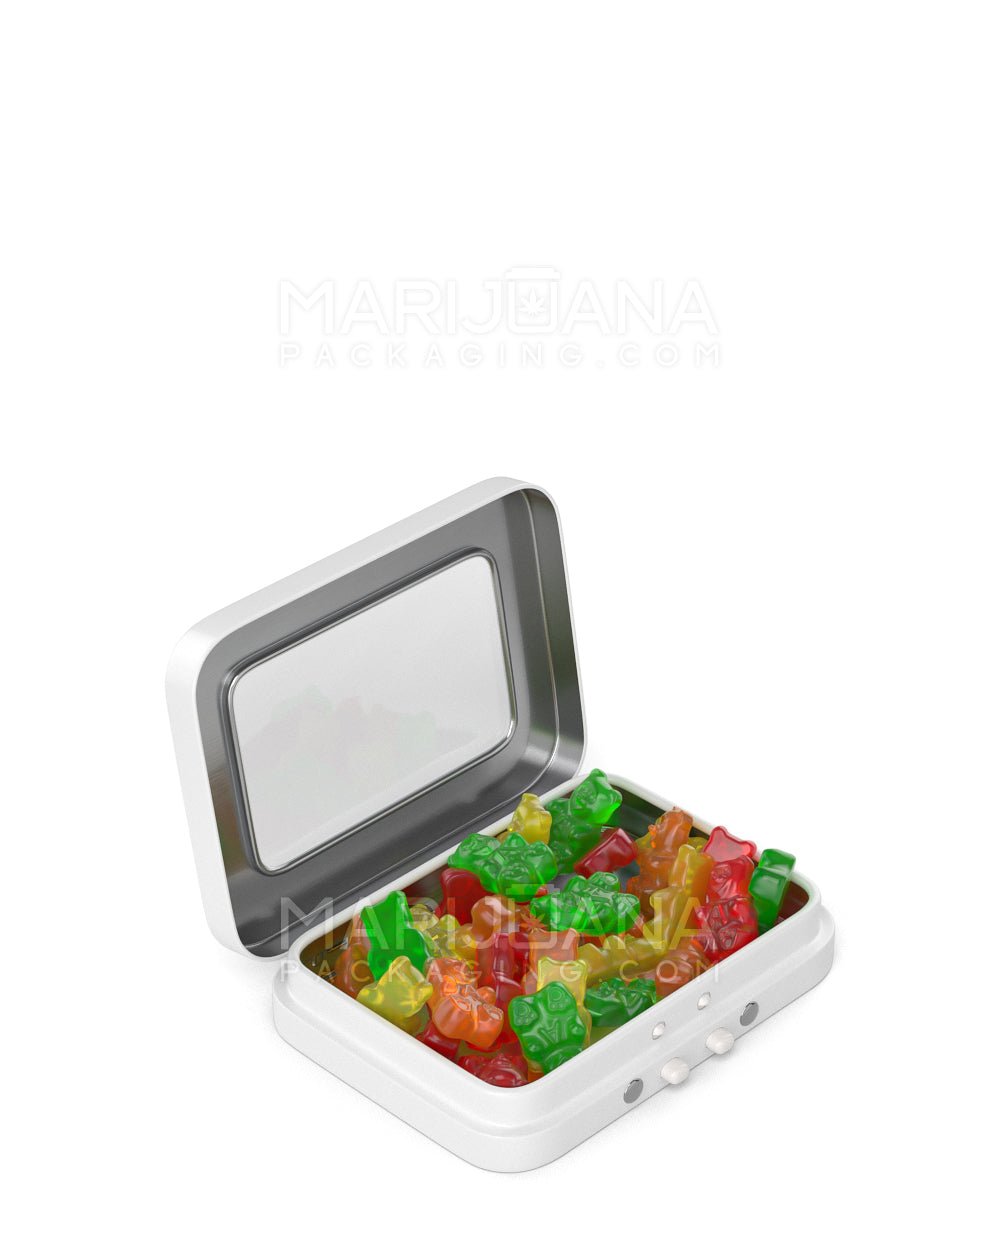 Child Resistant & Sustainable | Hinged-Lid Mini Size Vista Edible & Joint Box w/ See-Through Window |  White Tin  - 2